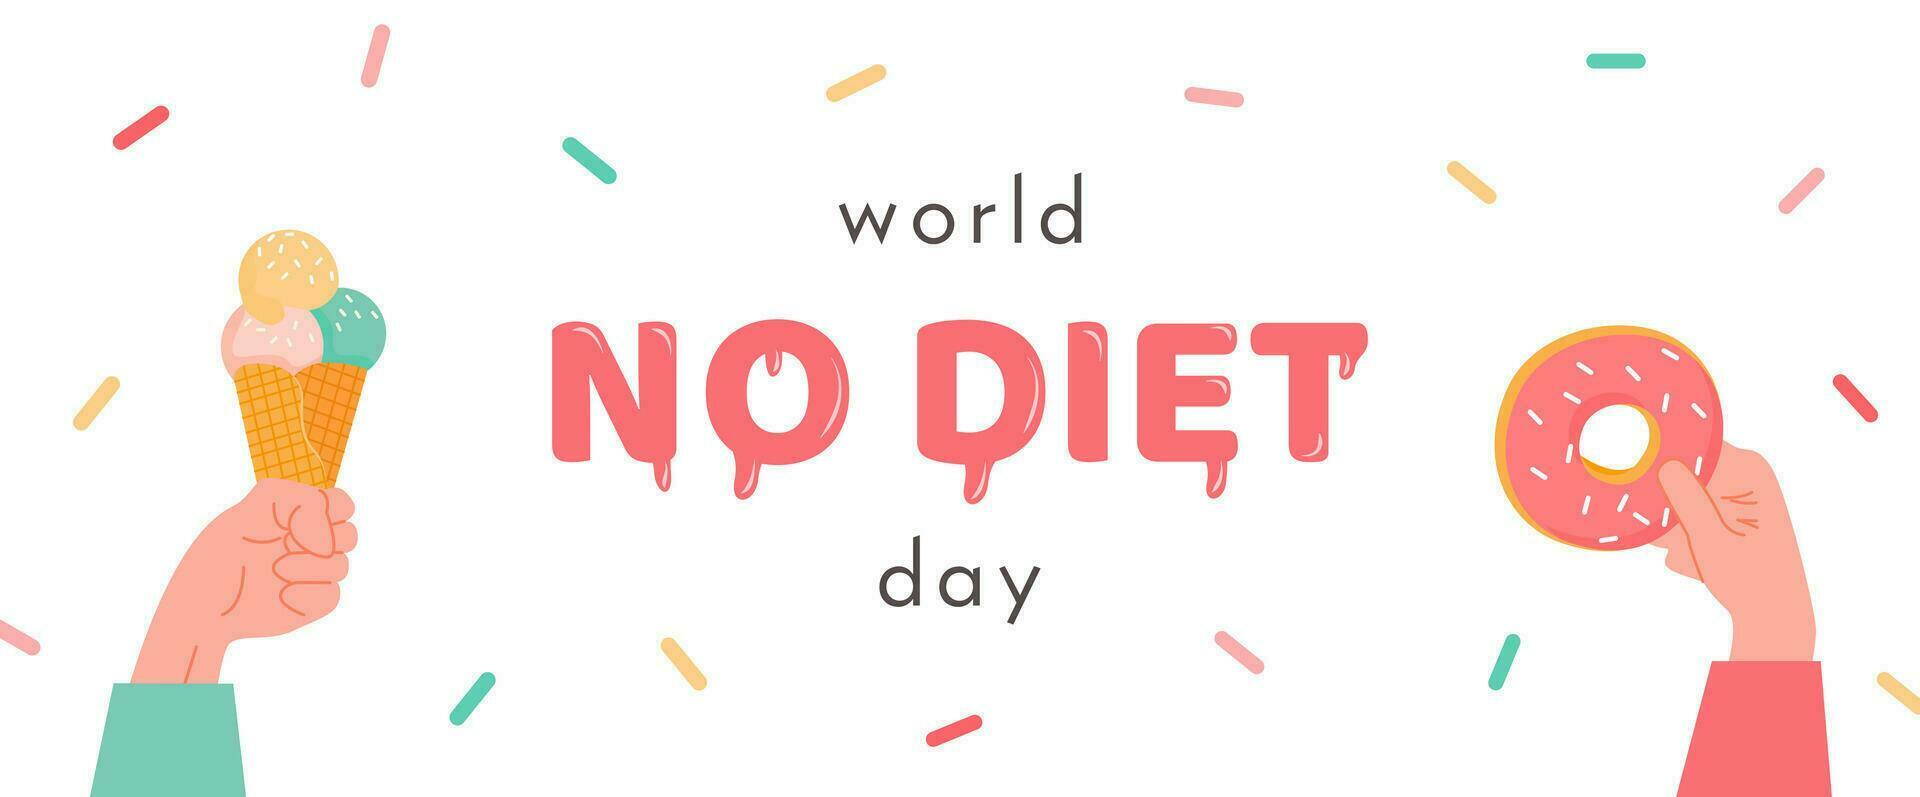 World No Diet Day. Banner with hand holding an ice cream in cone and arm with donut. Hand drawn letters with sweet sugary sprinkles on white background. Anti dieting concept. Flat vector illustration.